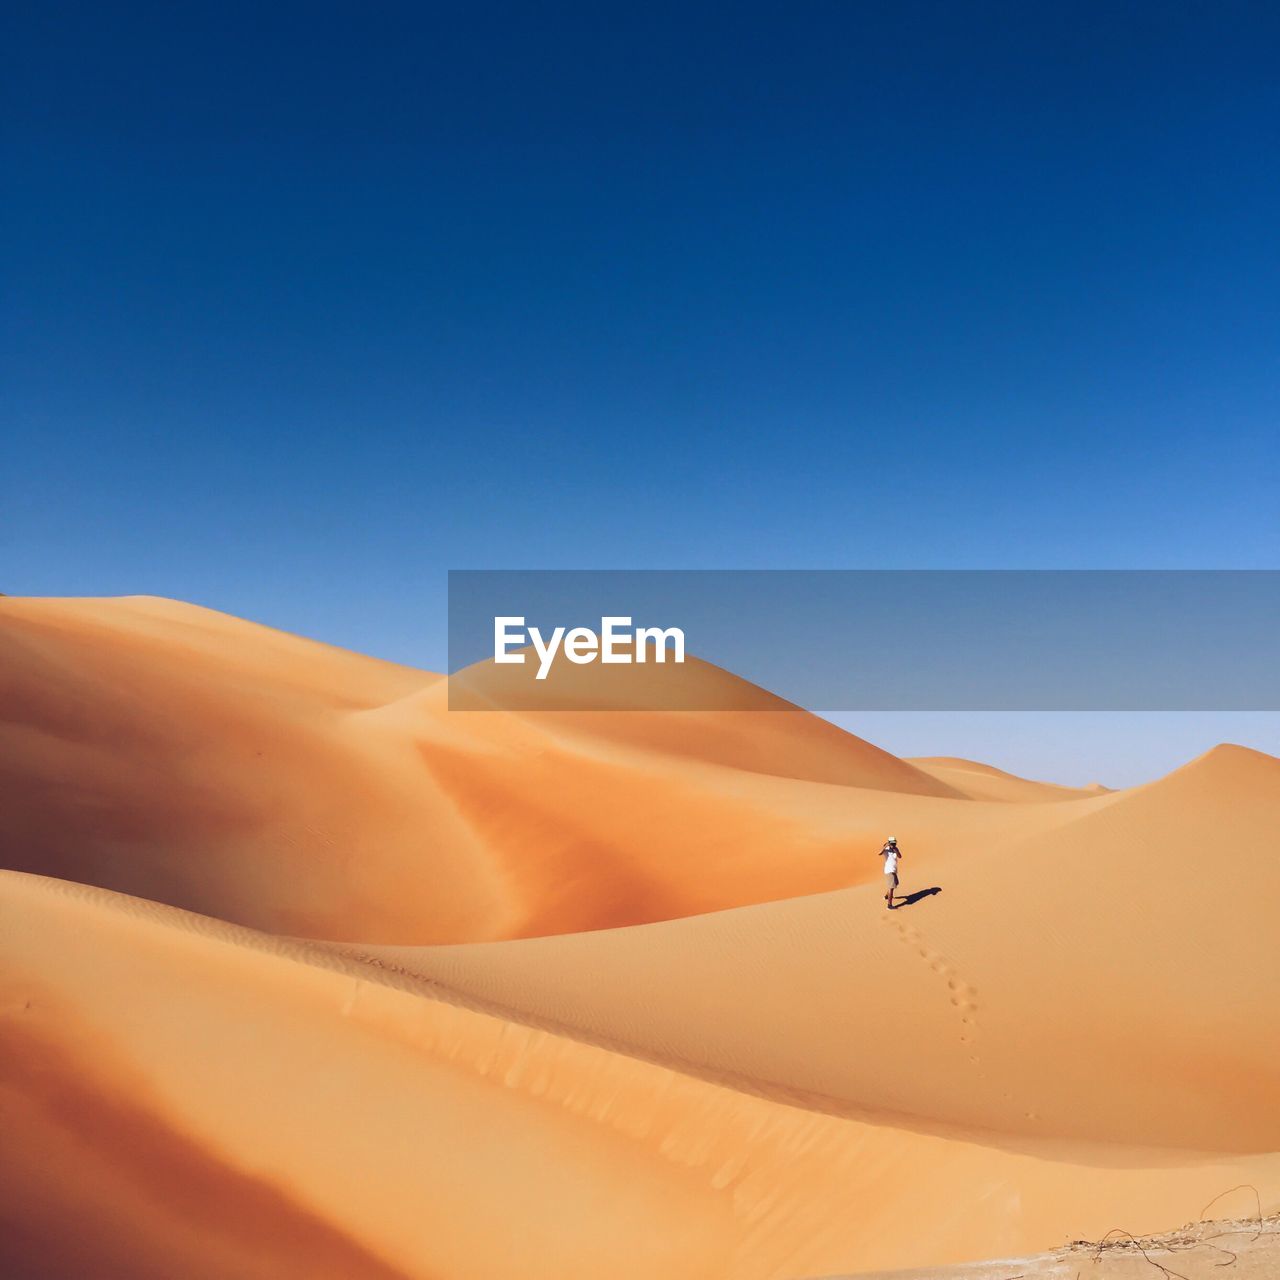 Distant view of man walking on sand dune in desert against clear blue sky